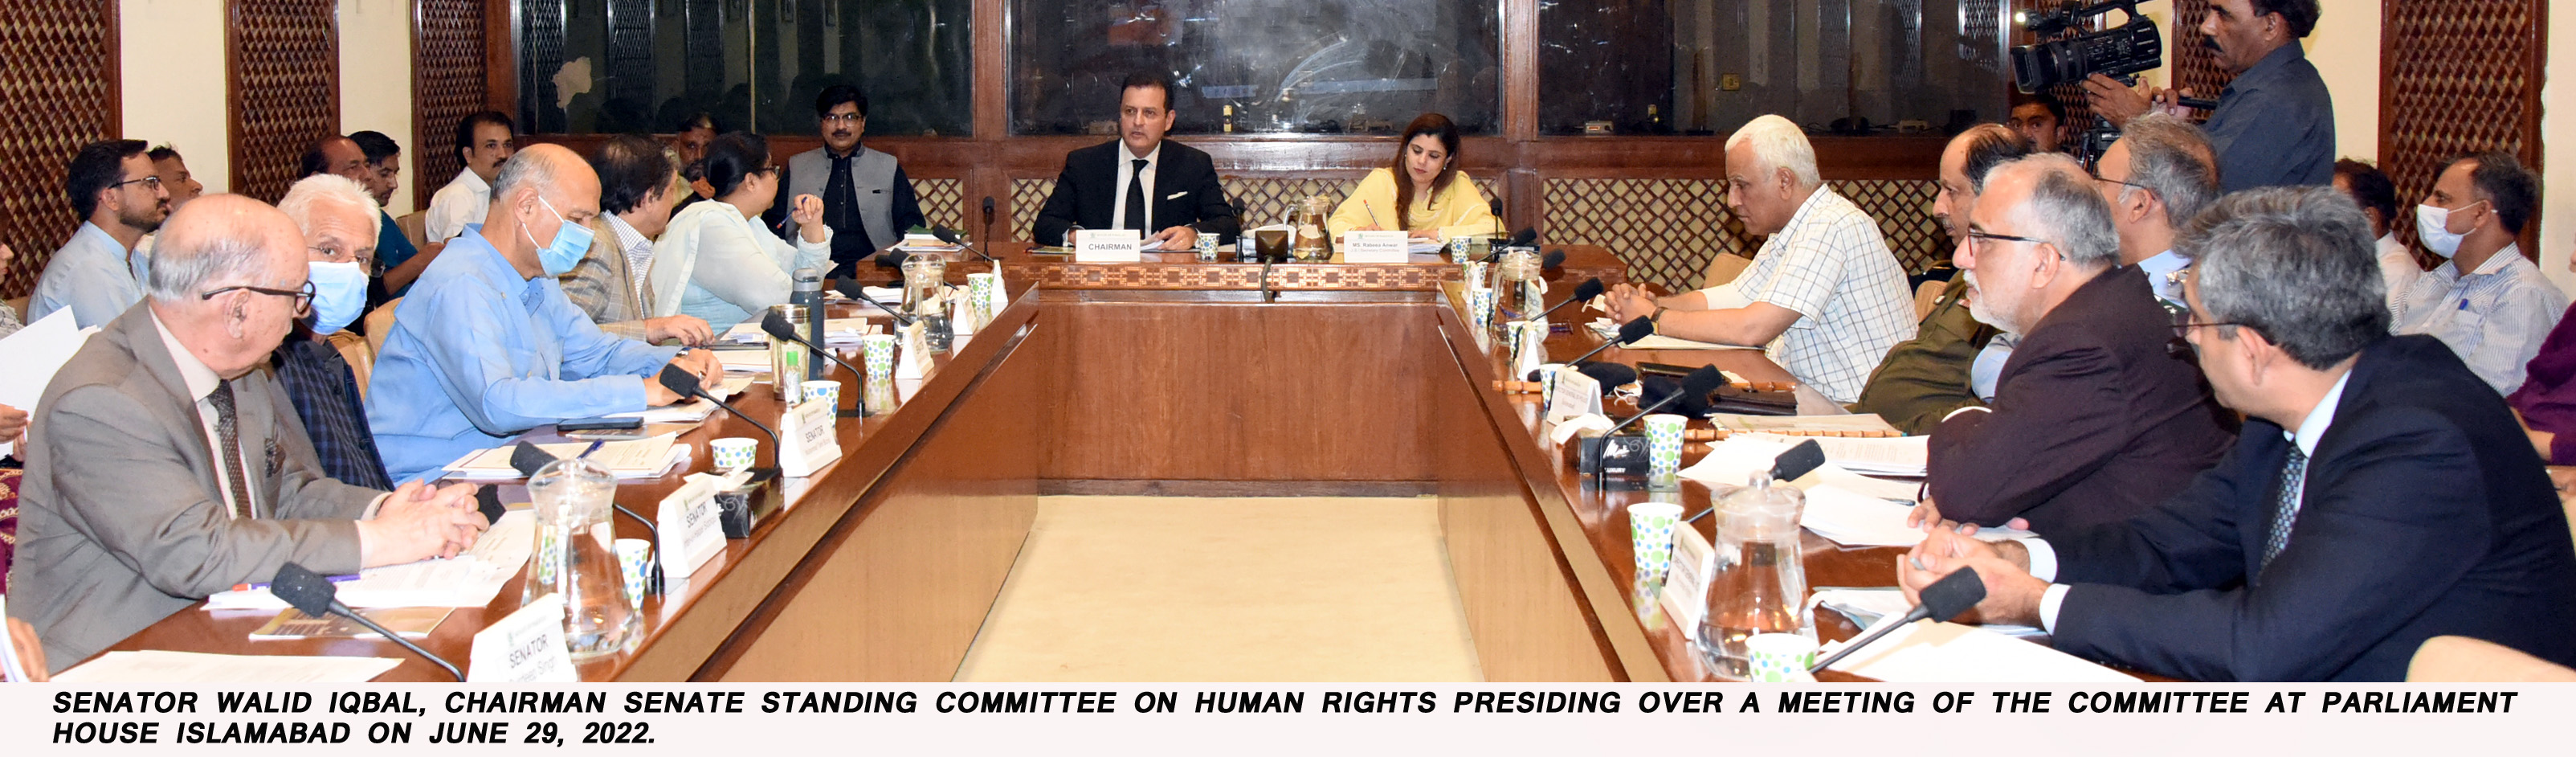 Senate Standing Committee on Human Rights met under the Chairmanship of Senator Walid Iqbal at the Parliament House on 29 June 2022.